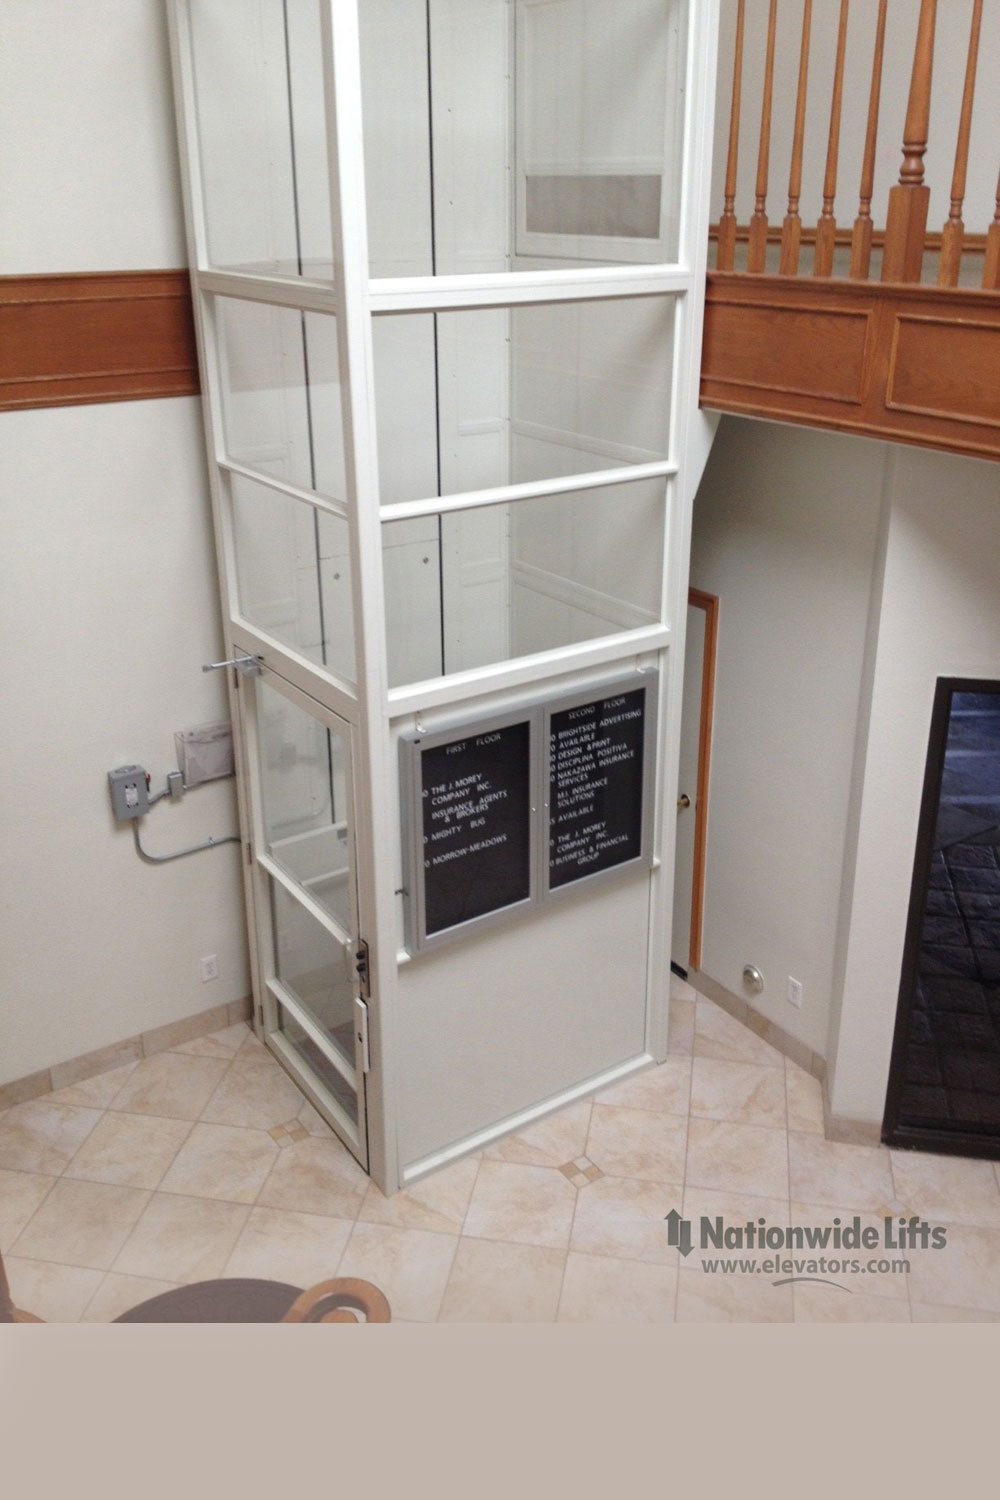 Hydraulic Home Elevator for Home use Vertical Wheelchair Lift